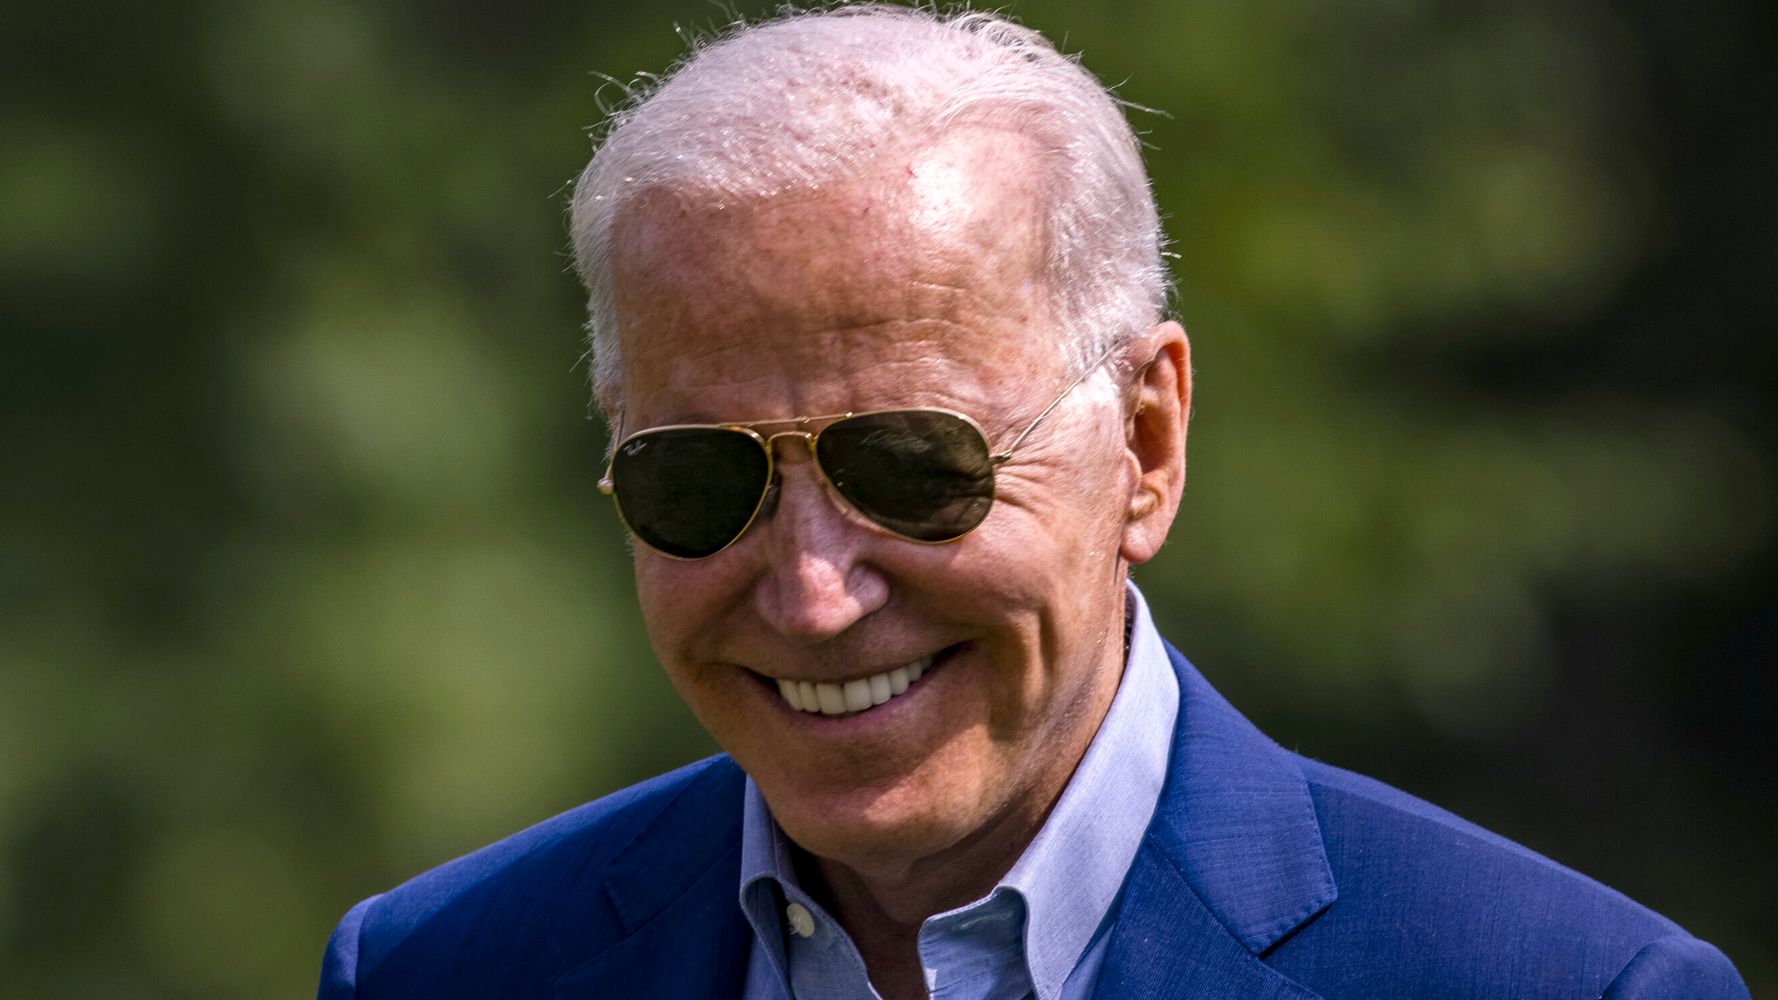 Republican Attempt To Smear Biden Over Mayonnaise Gets Creamed On Twitter